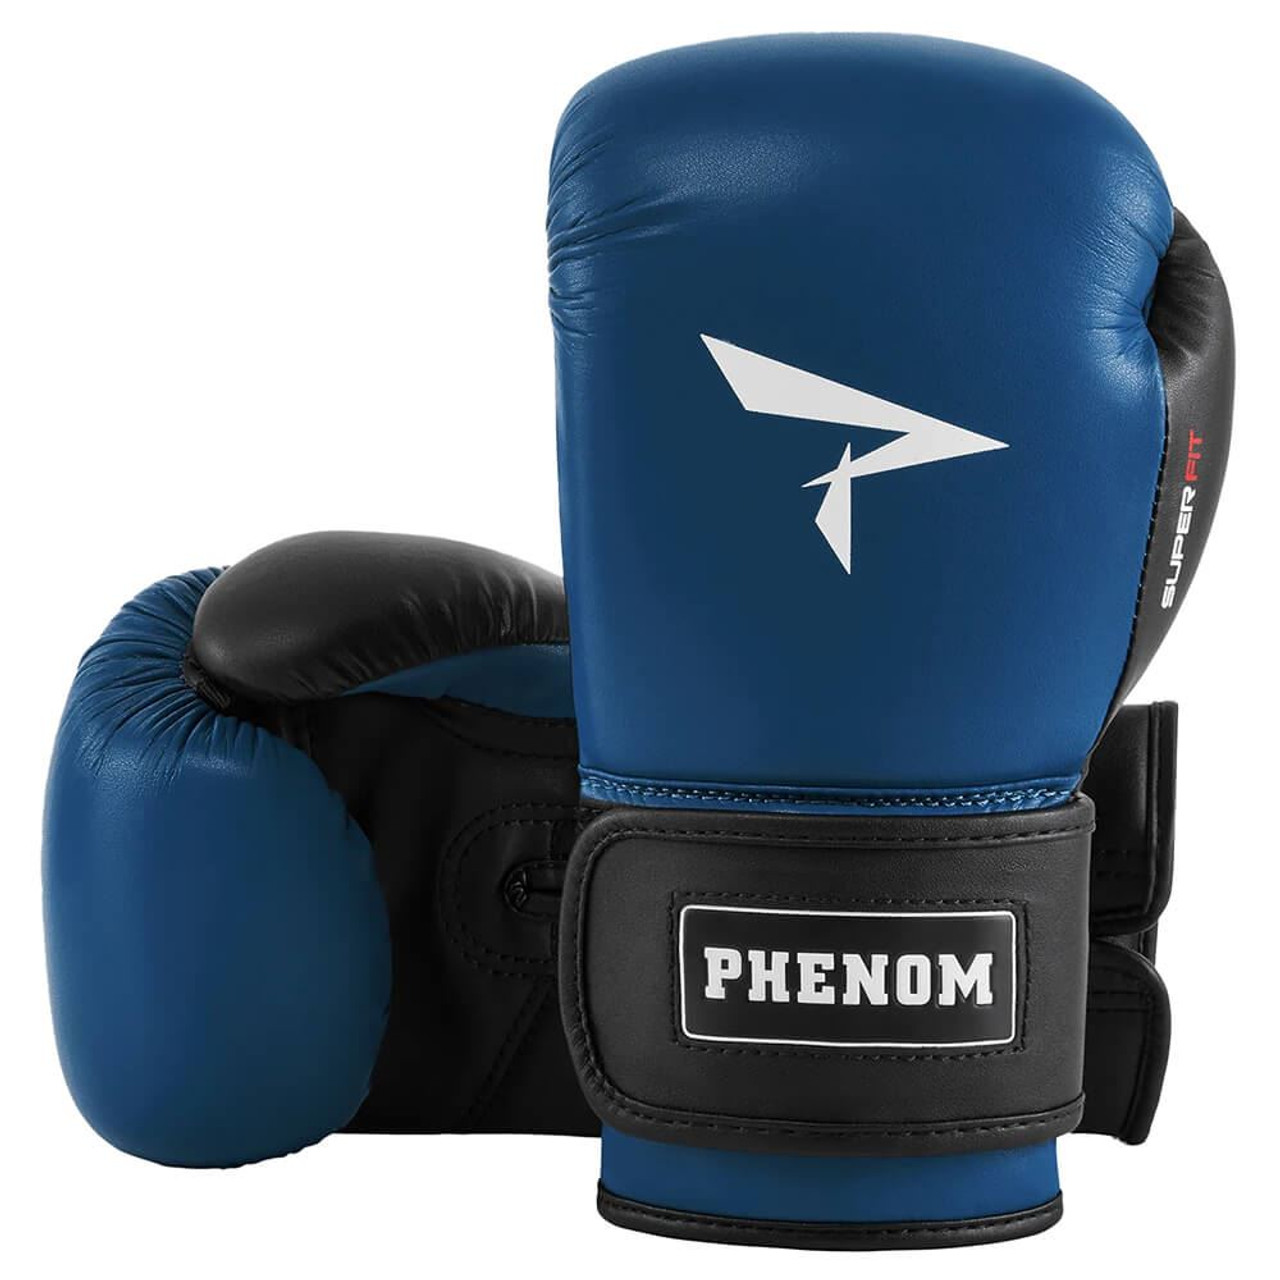 One Punch Boxing™ Gloves